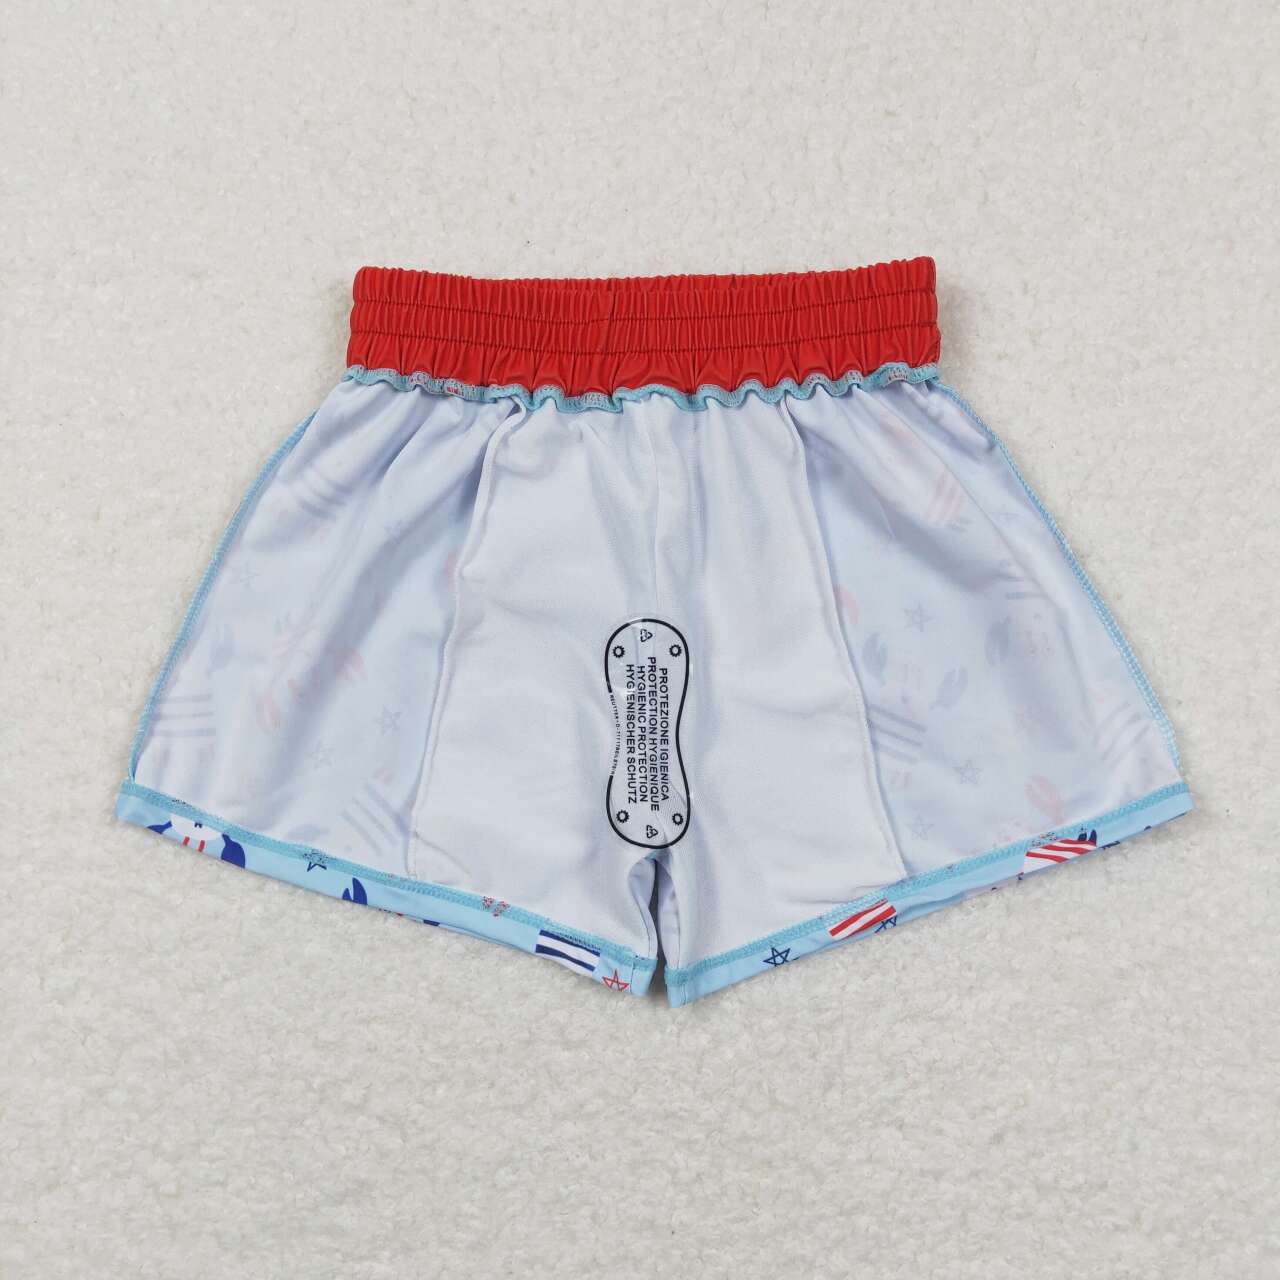 S0187 Crab five-pointed star lace red and blue swimming trunks